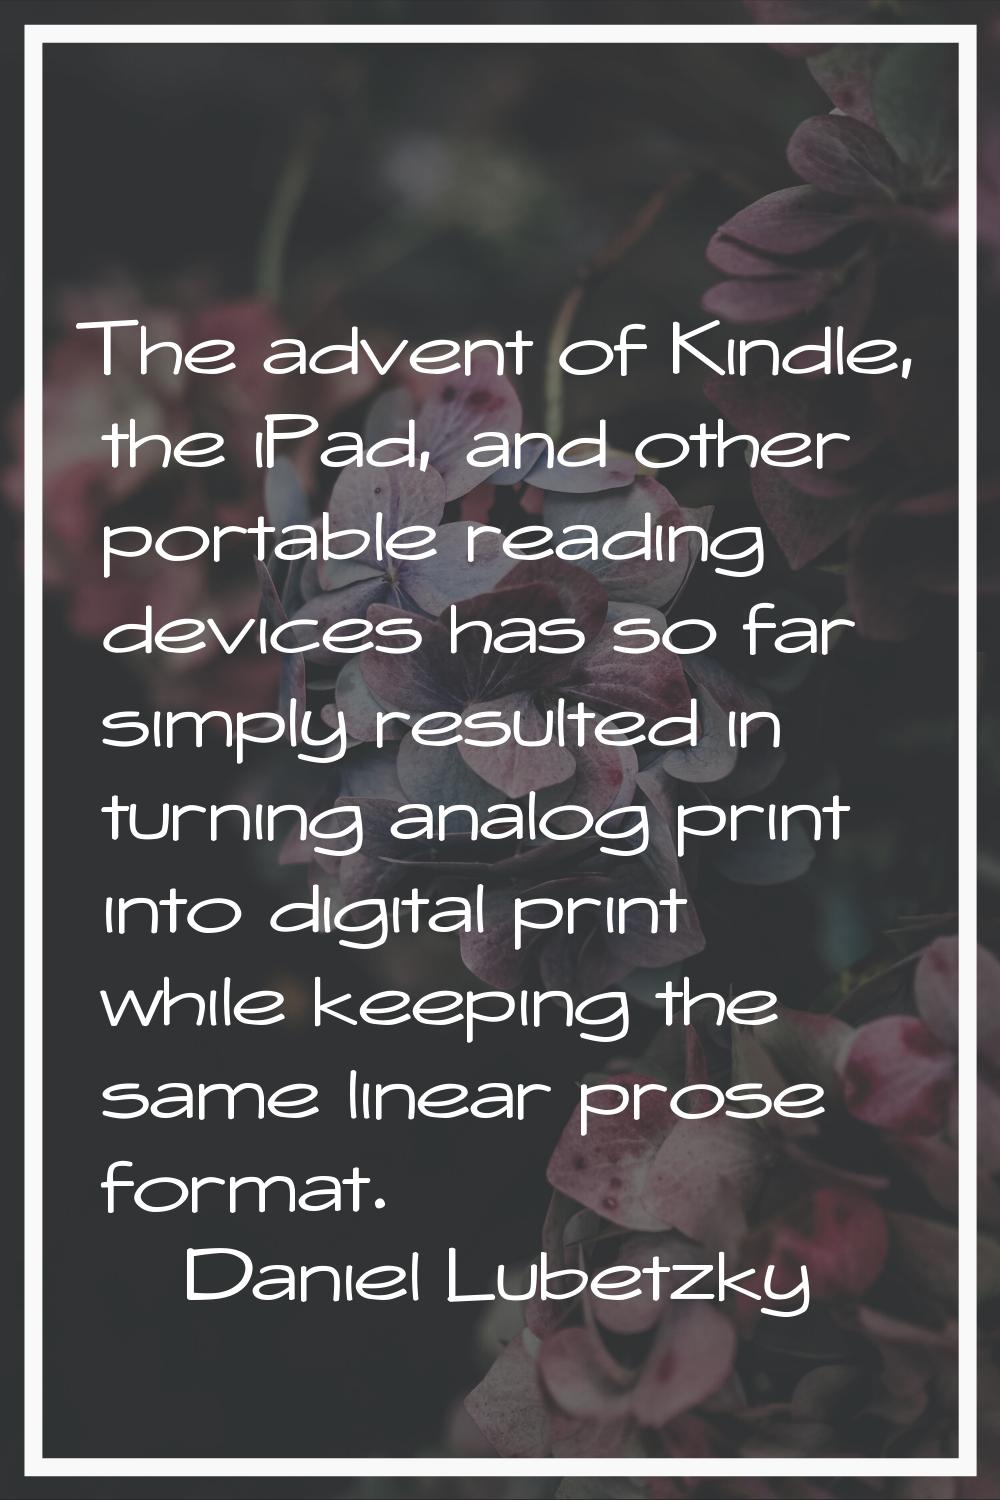 The advent of Kindle, the iPad, and other portable reading devices has so far simply resulted in tu